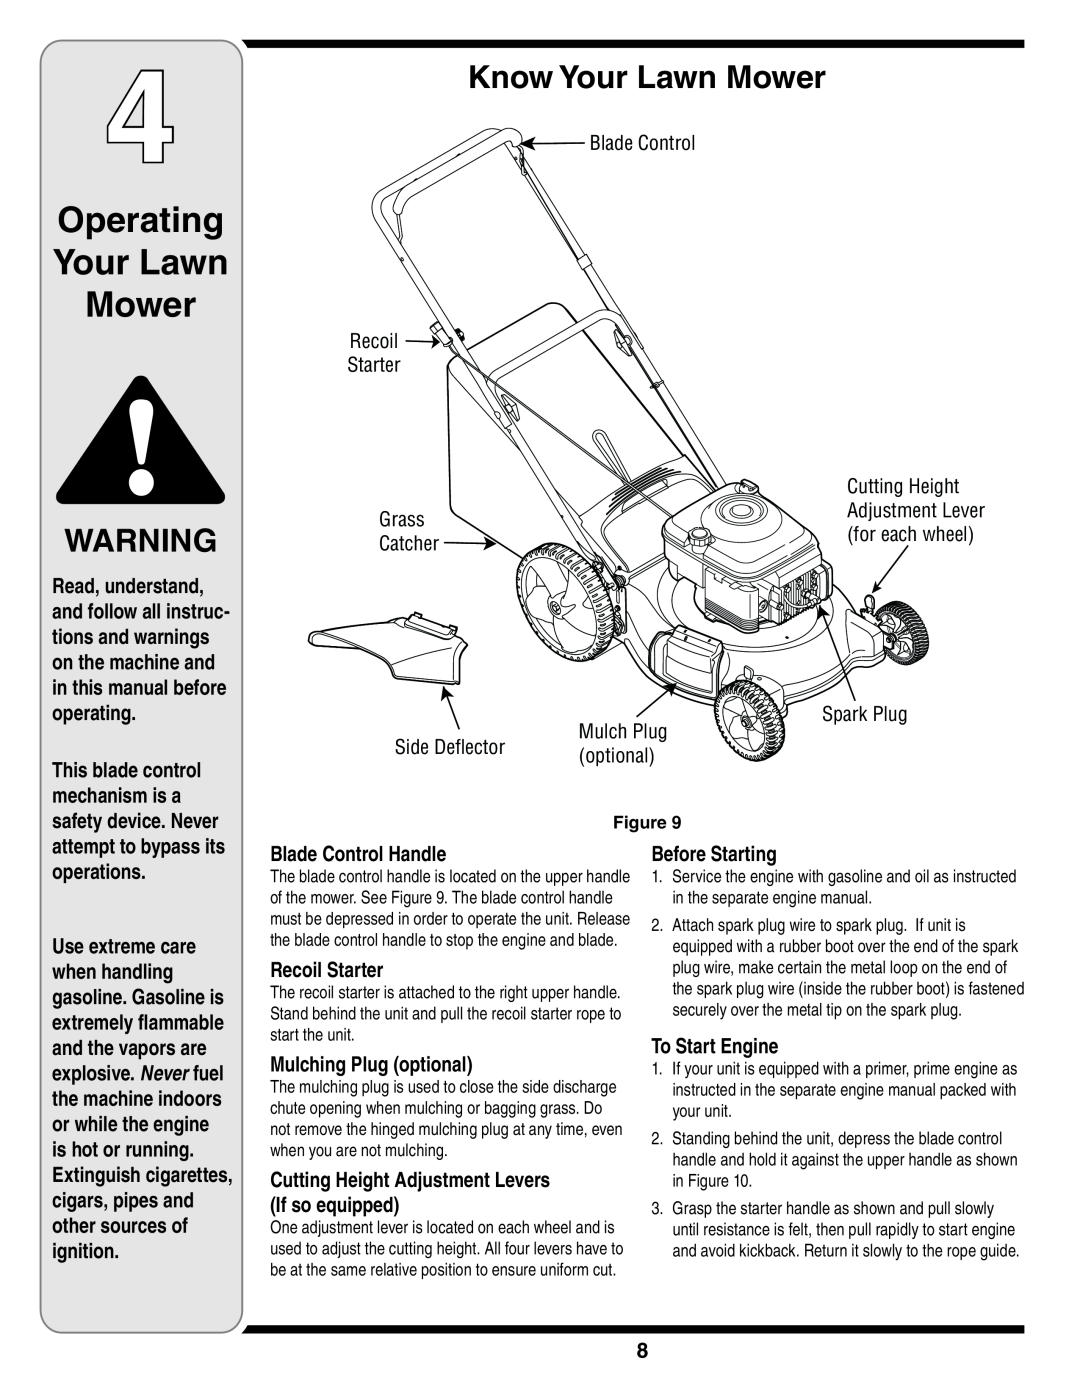 Troy-Bilt 540 Series warranty Operating Your Lawn Mower, Know Your Lawn Mower 